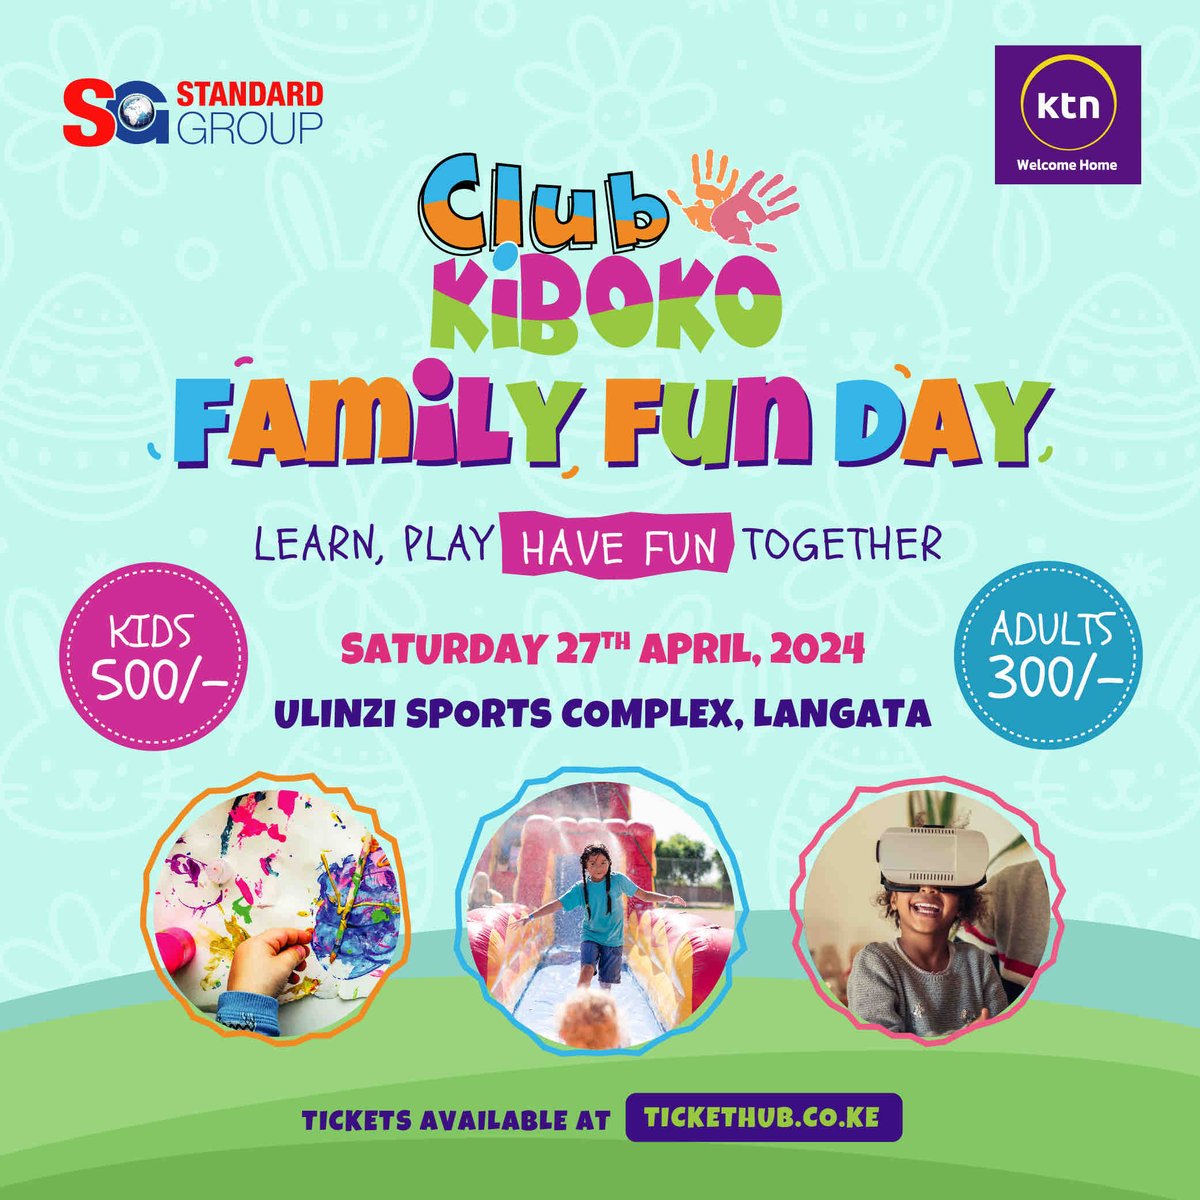 Are you ready to make memories with your family at Club Kiboko Family Fun Day?🎈🥳 Join us on the 27th of April at Ulinzi Complex. Click the link below and Grab your tickets today. Let the fun begin! 😊 tickethub.co.ke/event/music-an… #ClubKibokoFamilyFunDay